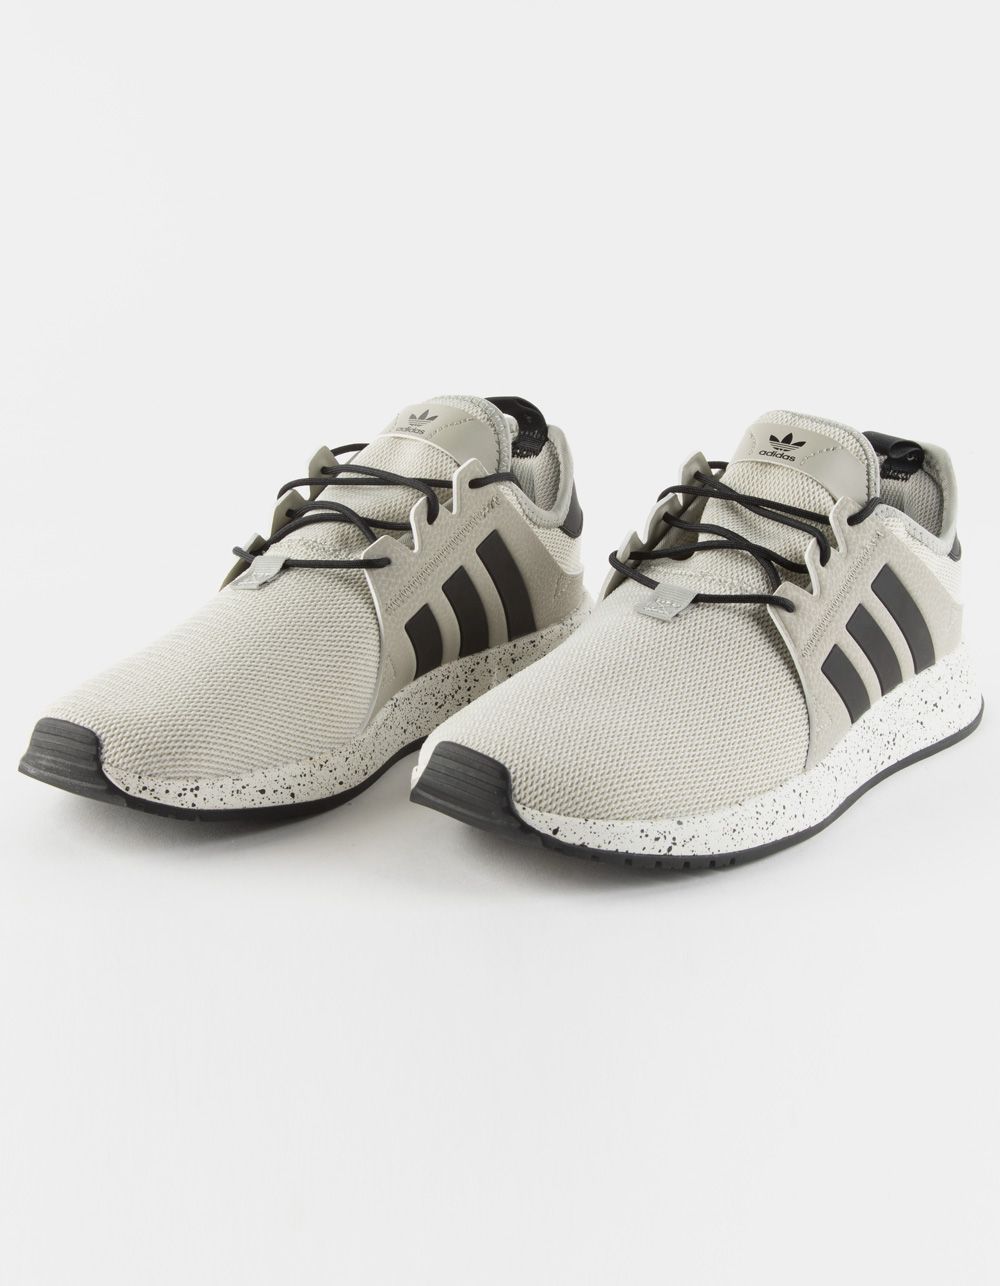 ADIDAS X_PLR Mens Shoes - GRAY - BY9255 | Tillys